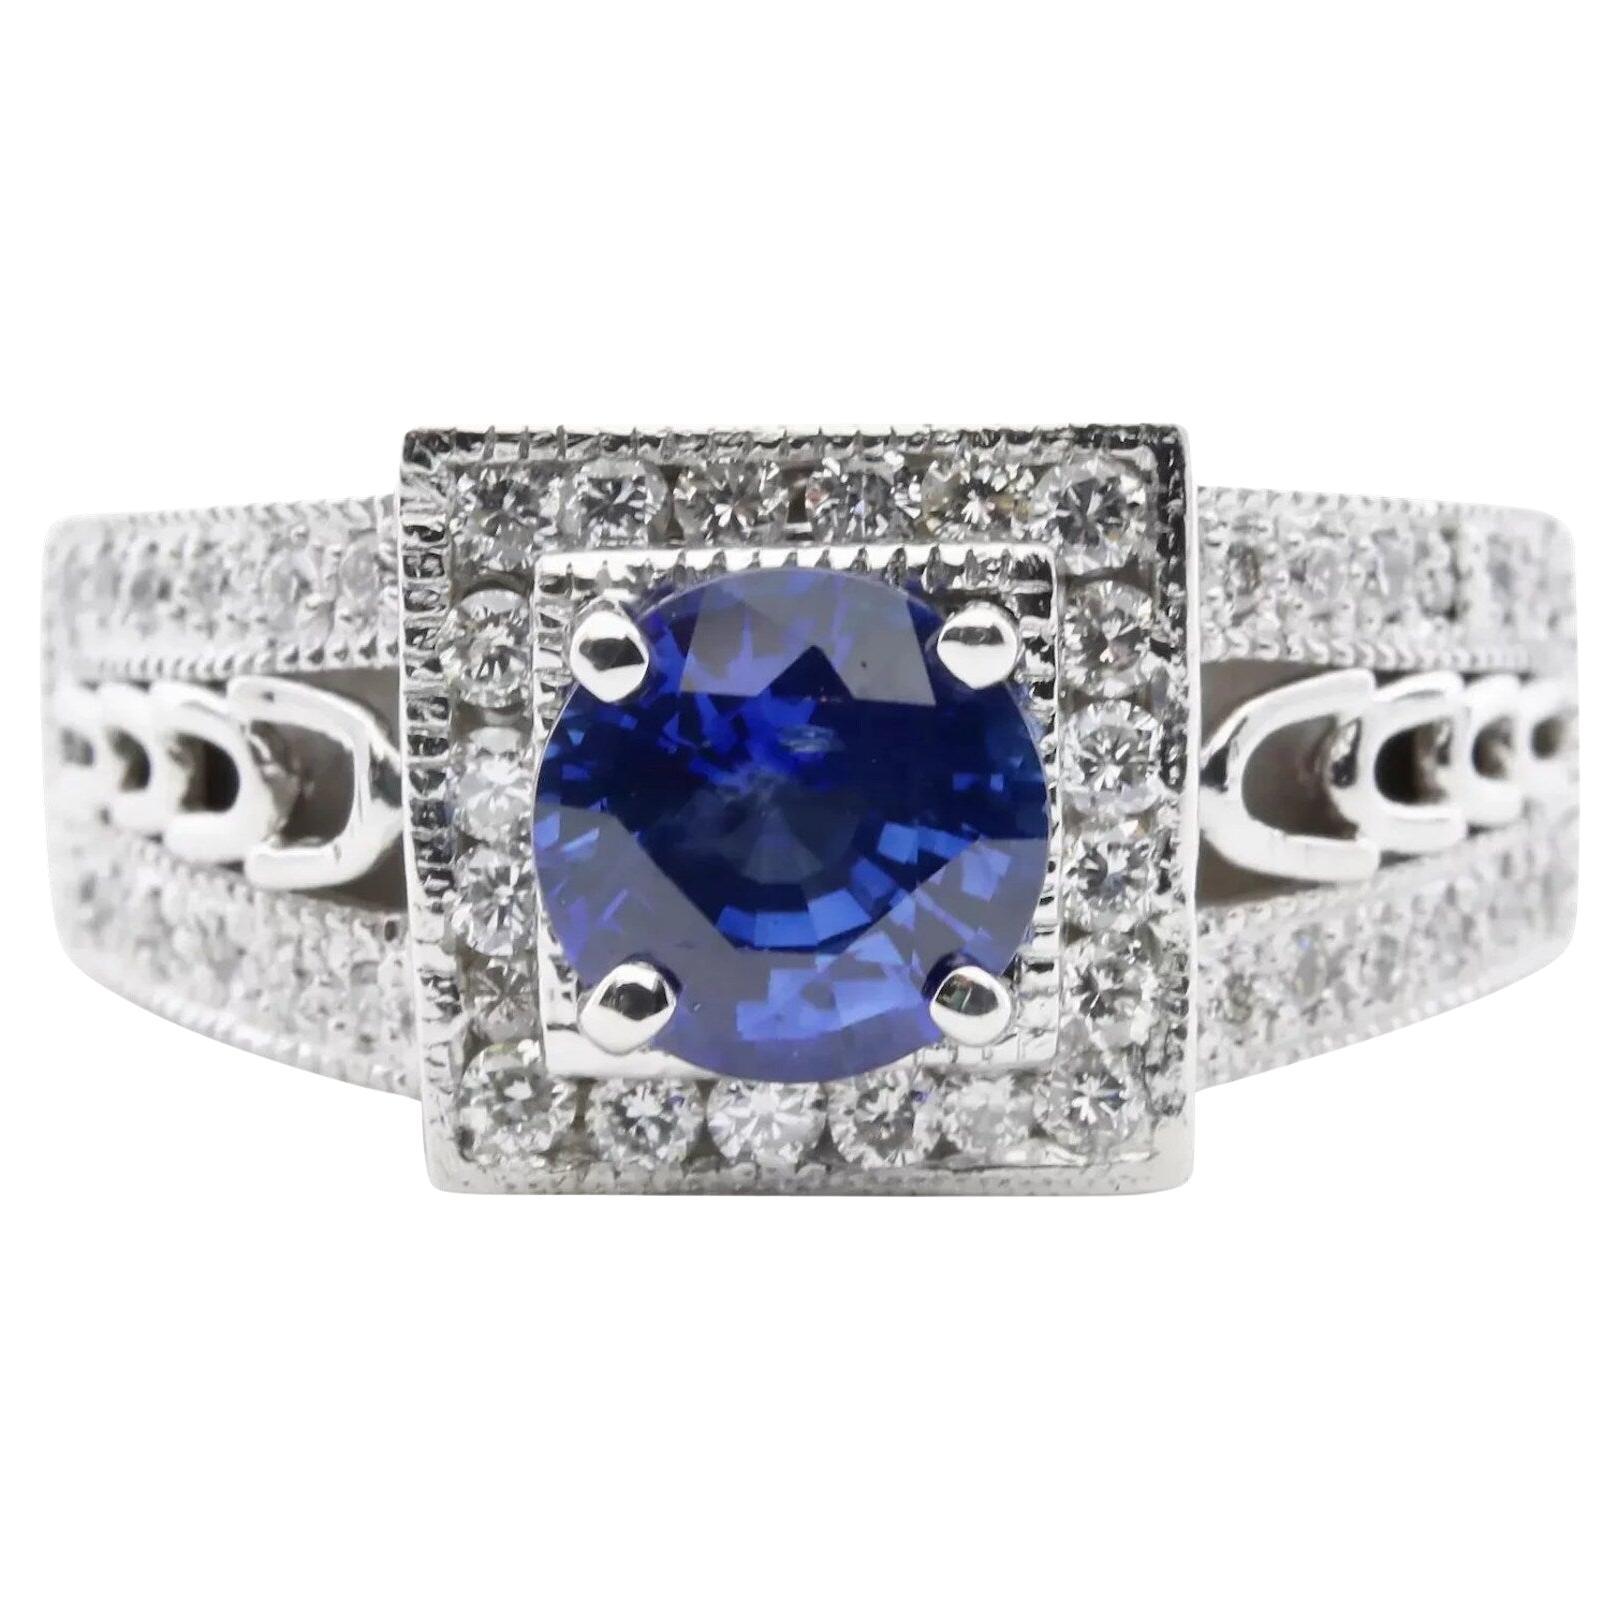 Contemporary Rich Blue 1.68ctw Sapphire & Diamond Ring in 14K White Gold For Sale